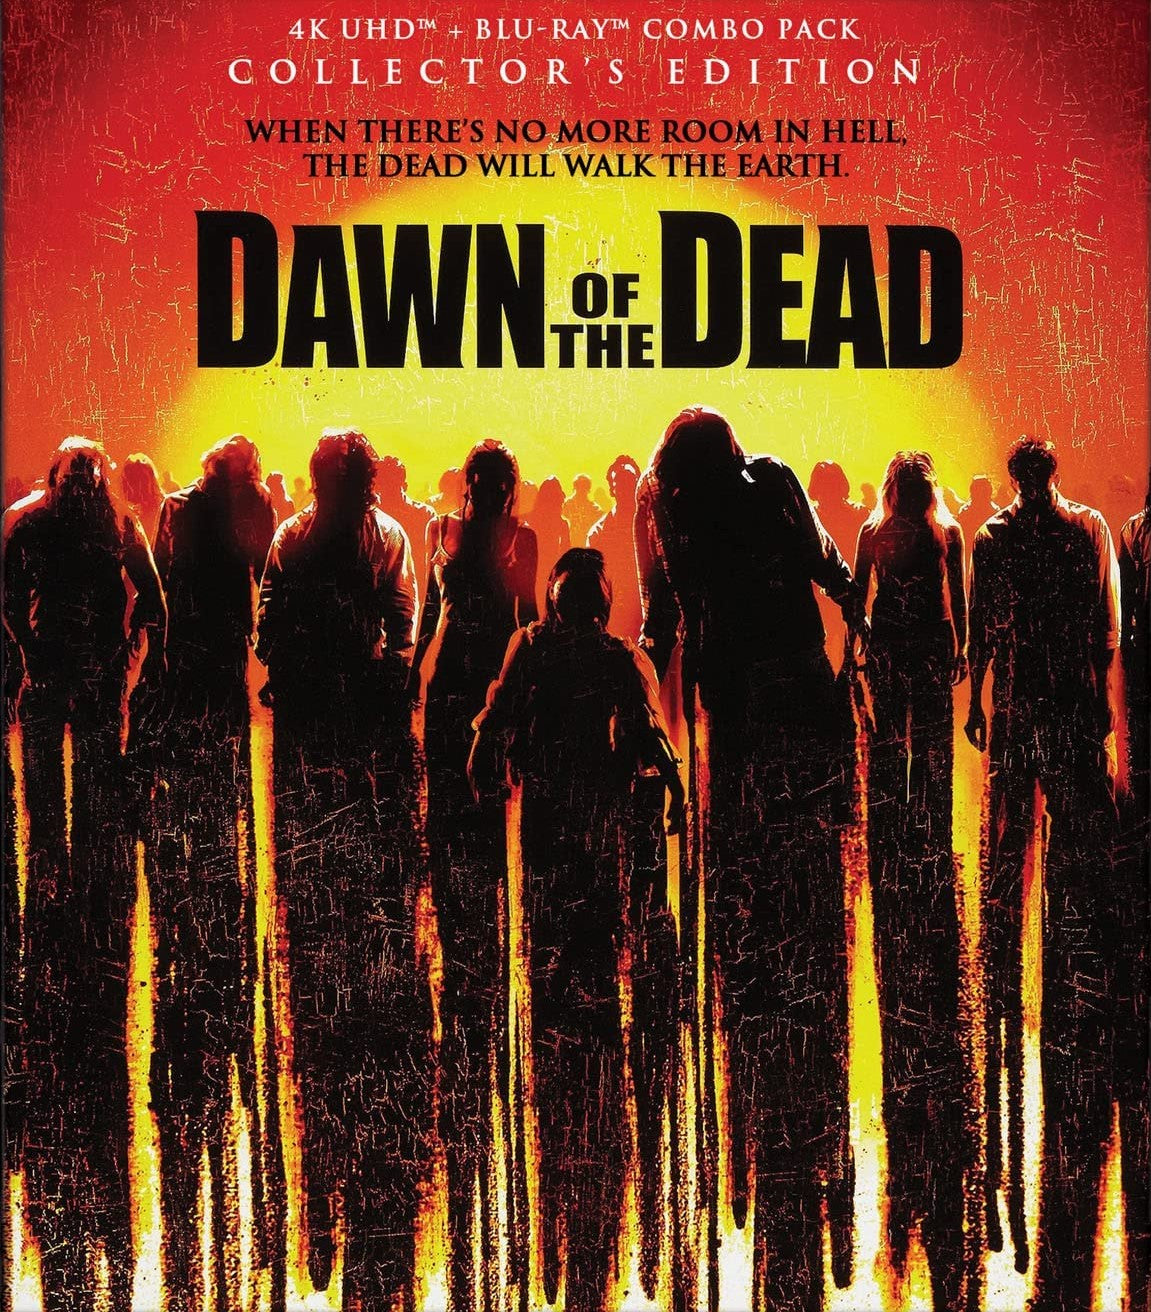 DAWN OF THE DEAD (COLLECTOR'S EDITION) 4K UHD/BLU-RAY